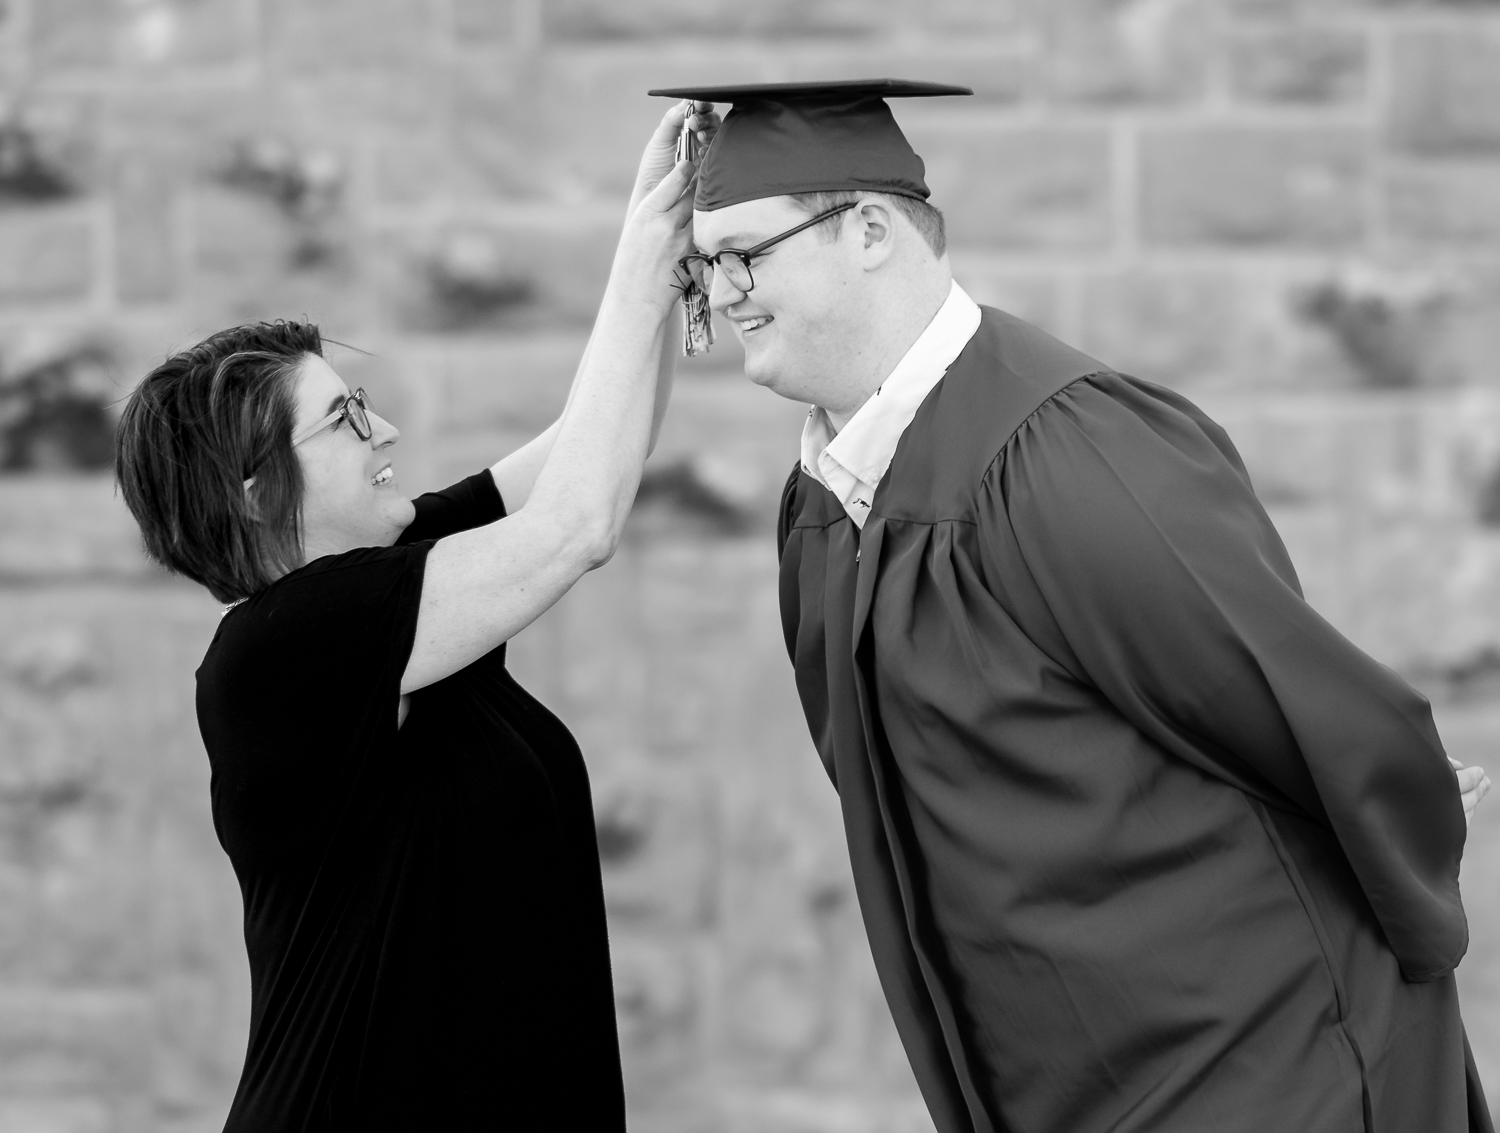 Black and white family photos. A mother adjusting the tassel on her son's graduation cap.